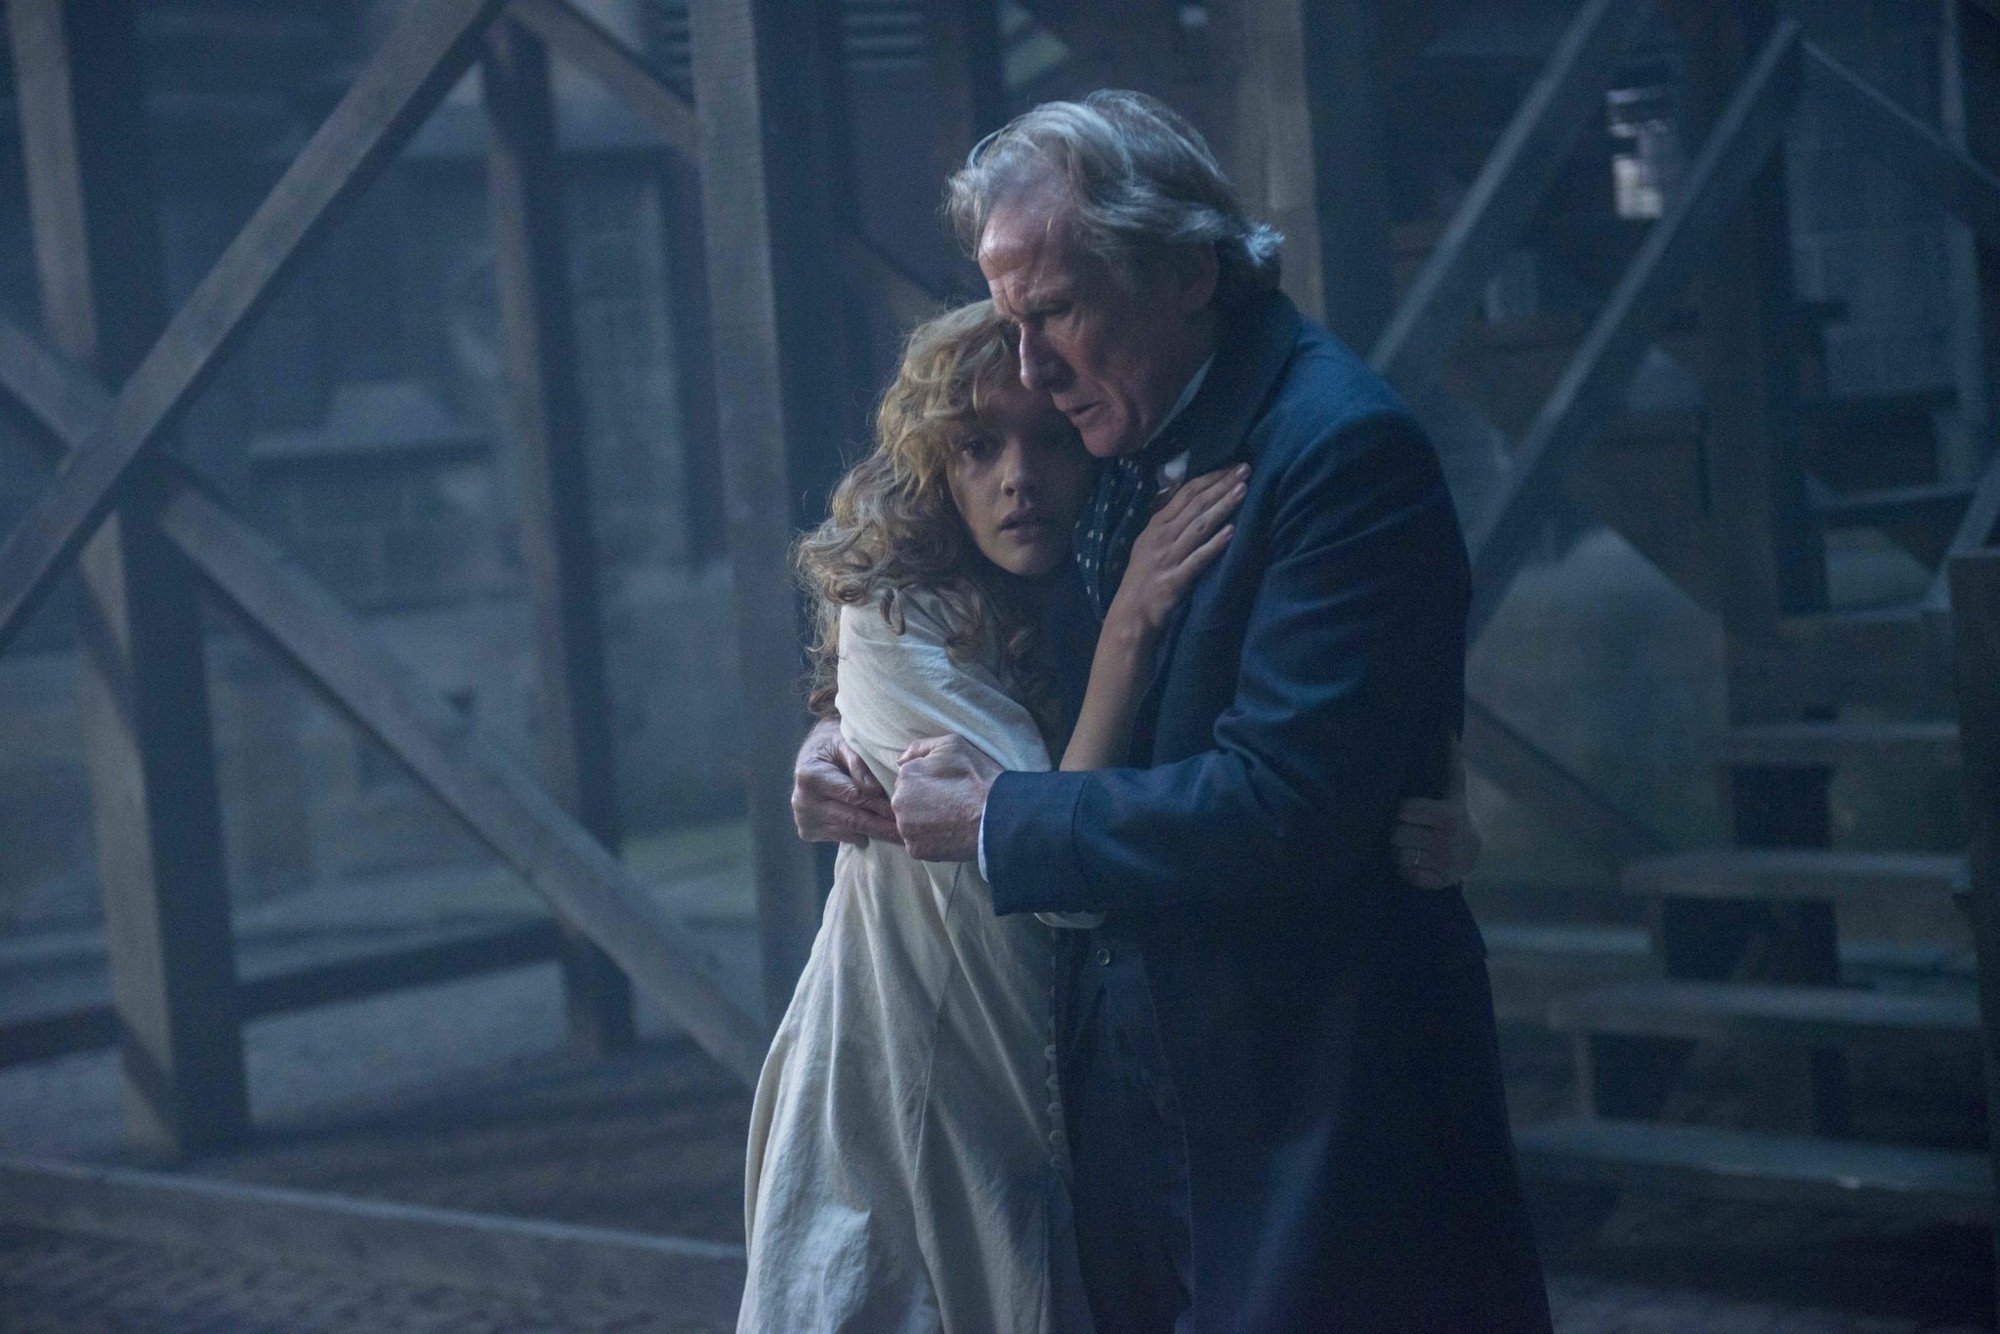 Olivia Cooke stars as Lizzie Cree and Bill Nighy stars as John Kildare in RLJ Entertainment's The Limehouse Golem (2017)